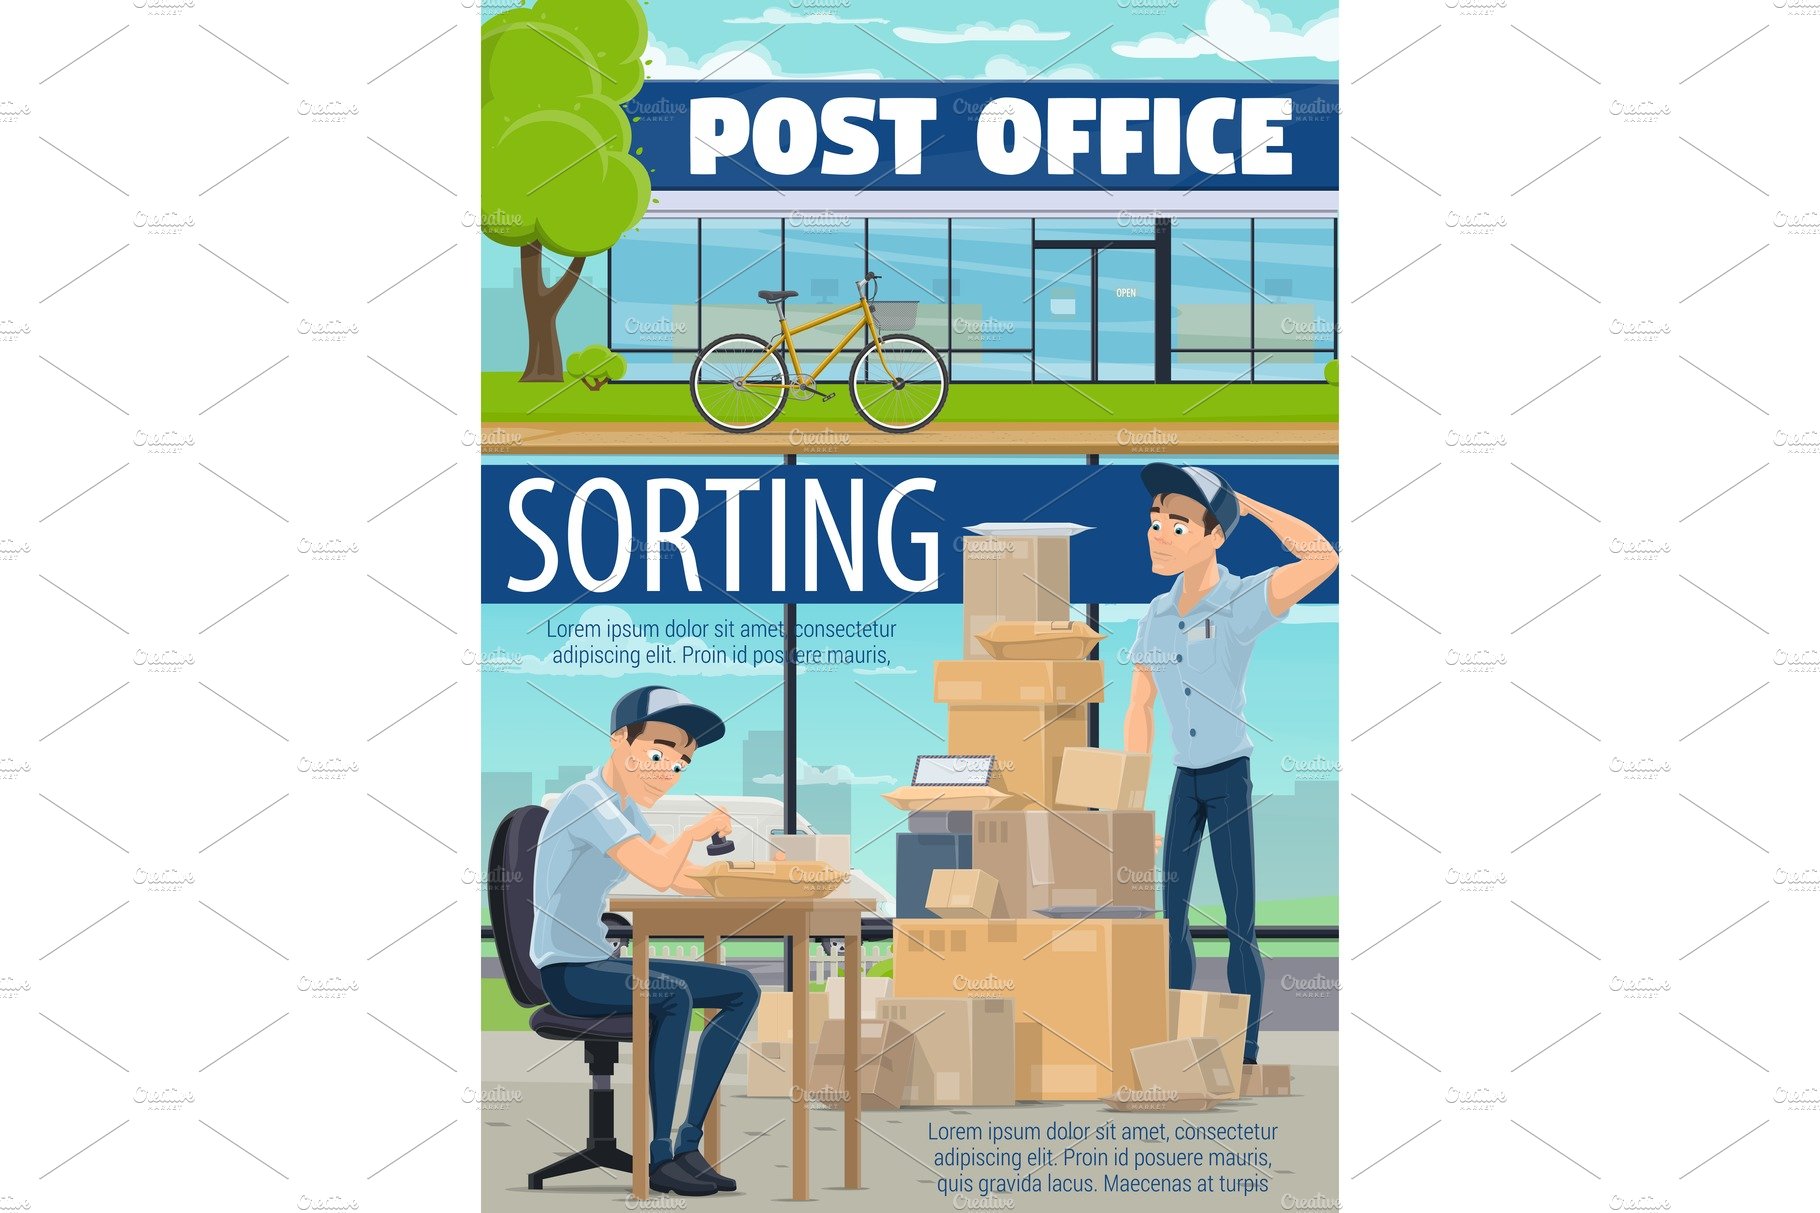 Mailman sorting mail in office cover image.